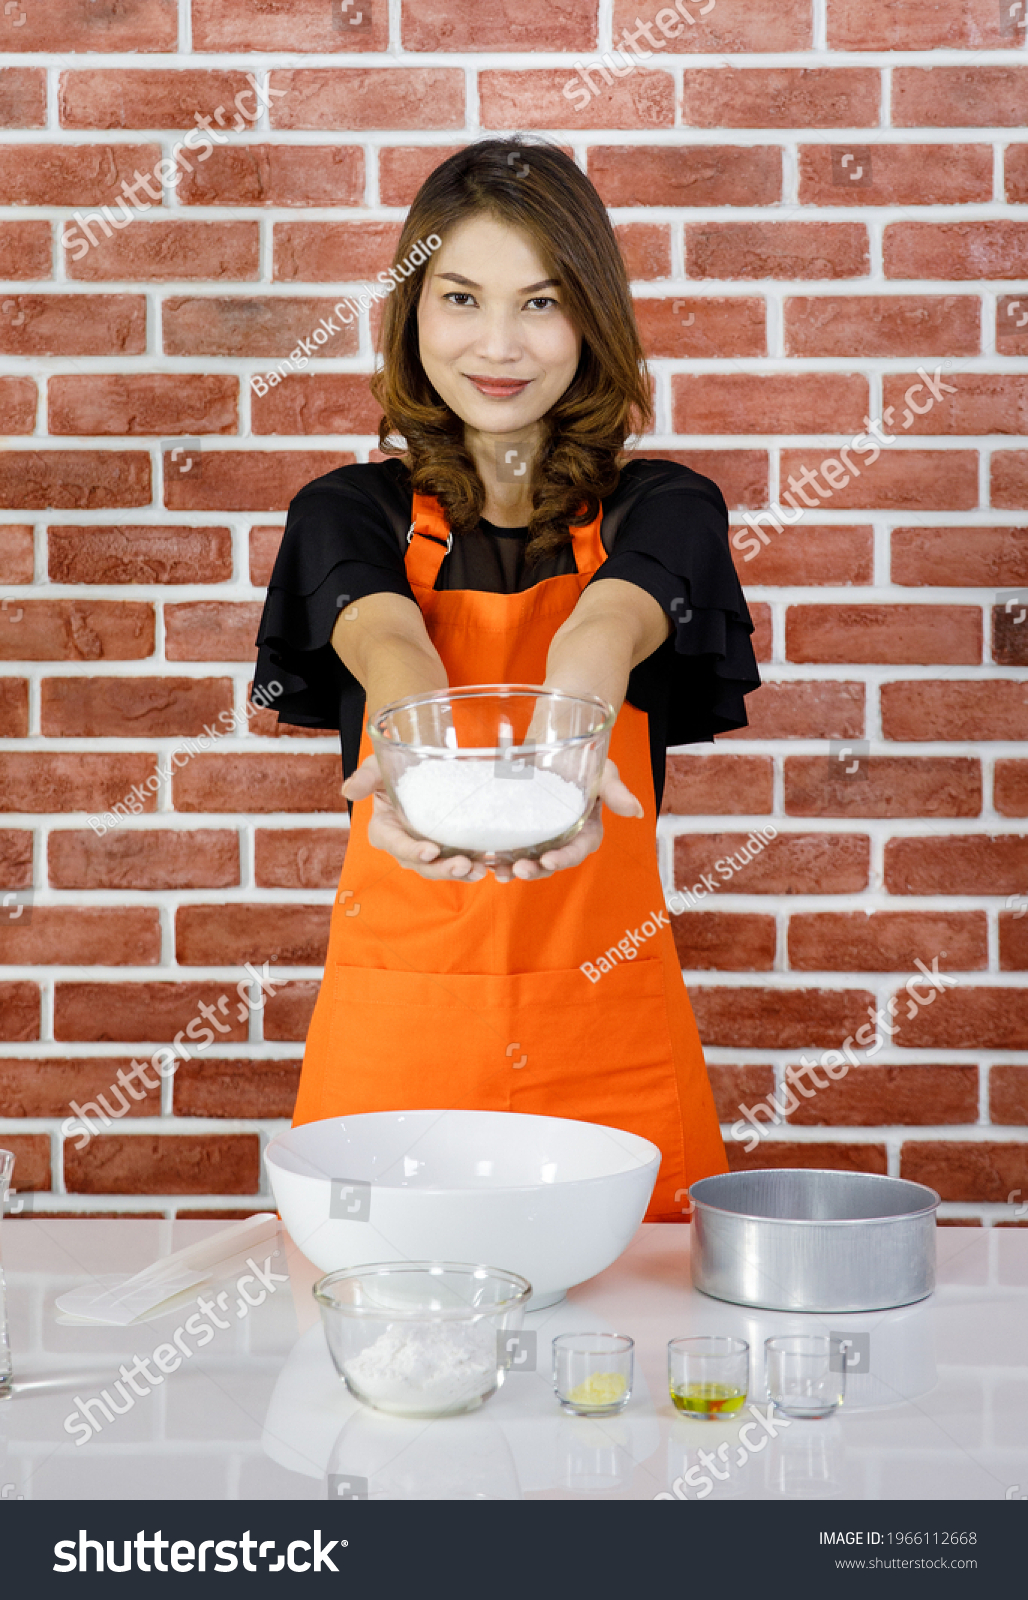 Asian young pastry chef lady in orange apron standing smiling look at camera showing glass bowl of white flour in hand when teaching baking and cooking in front red brick wall kitchen background. #1966112668